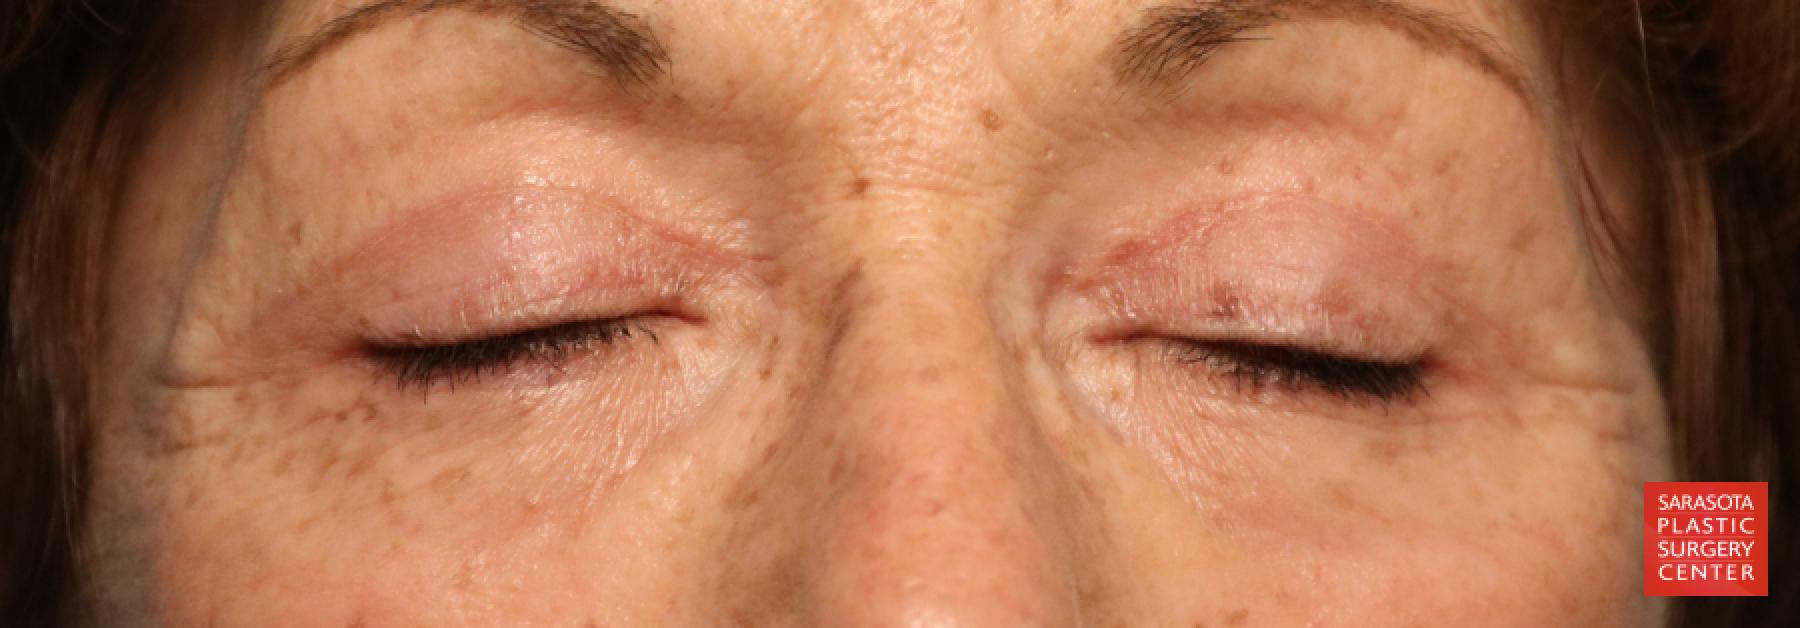 Eyelid Lift: Patient 6 - After 3